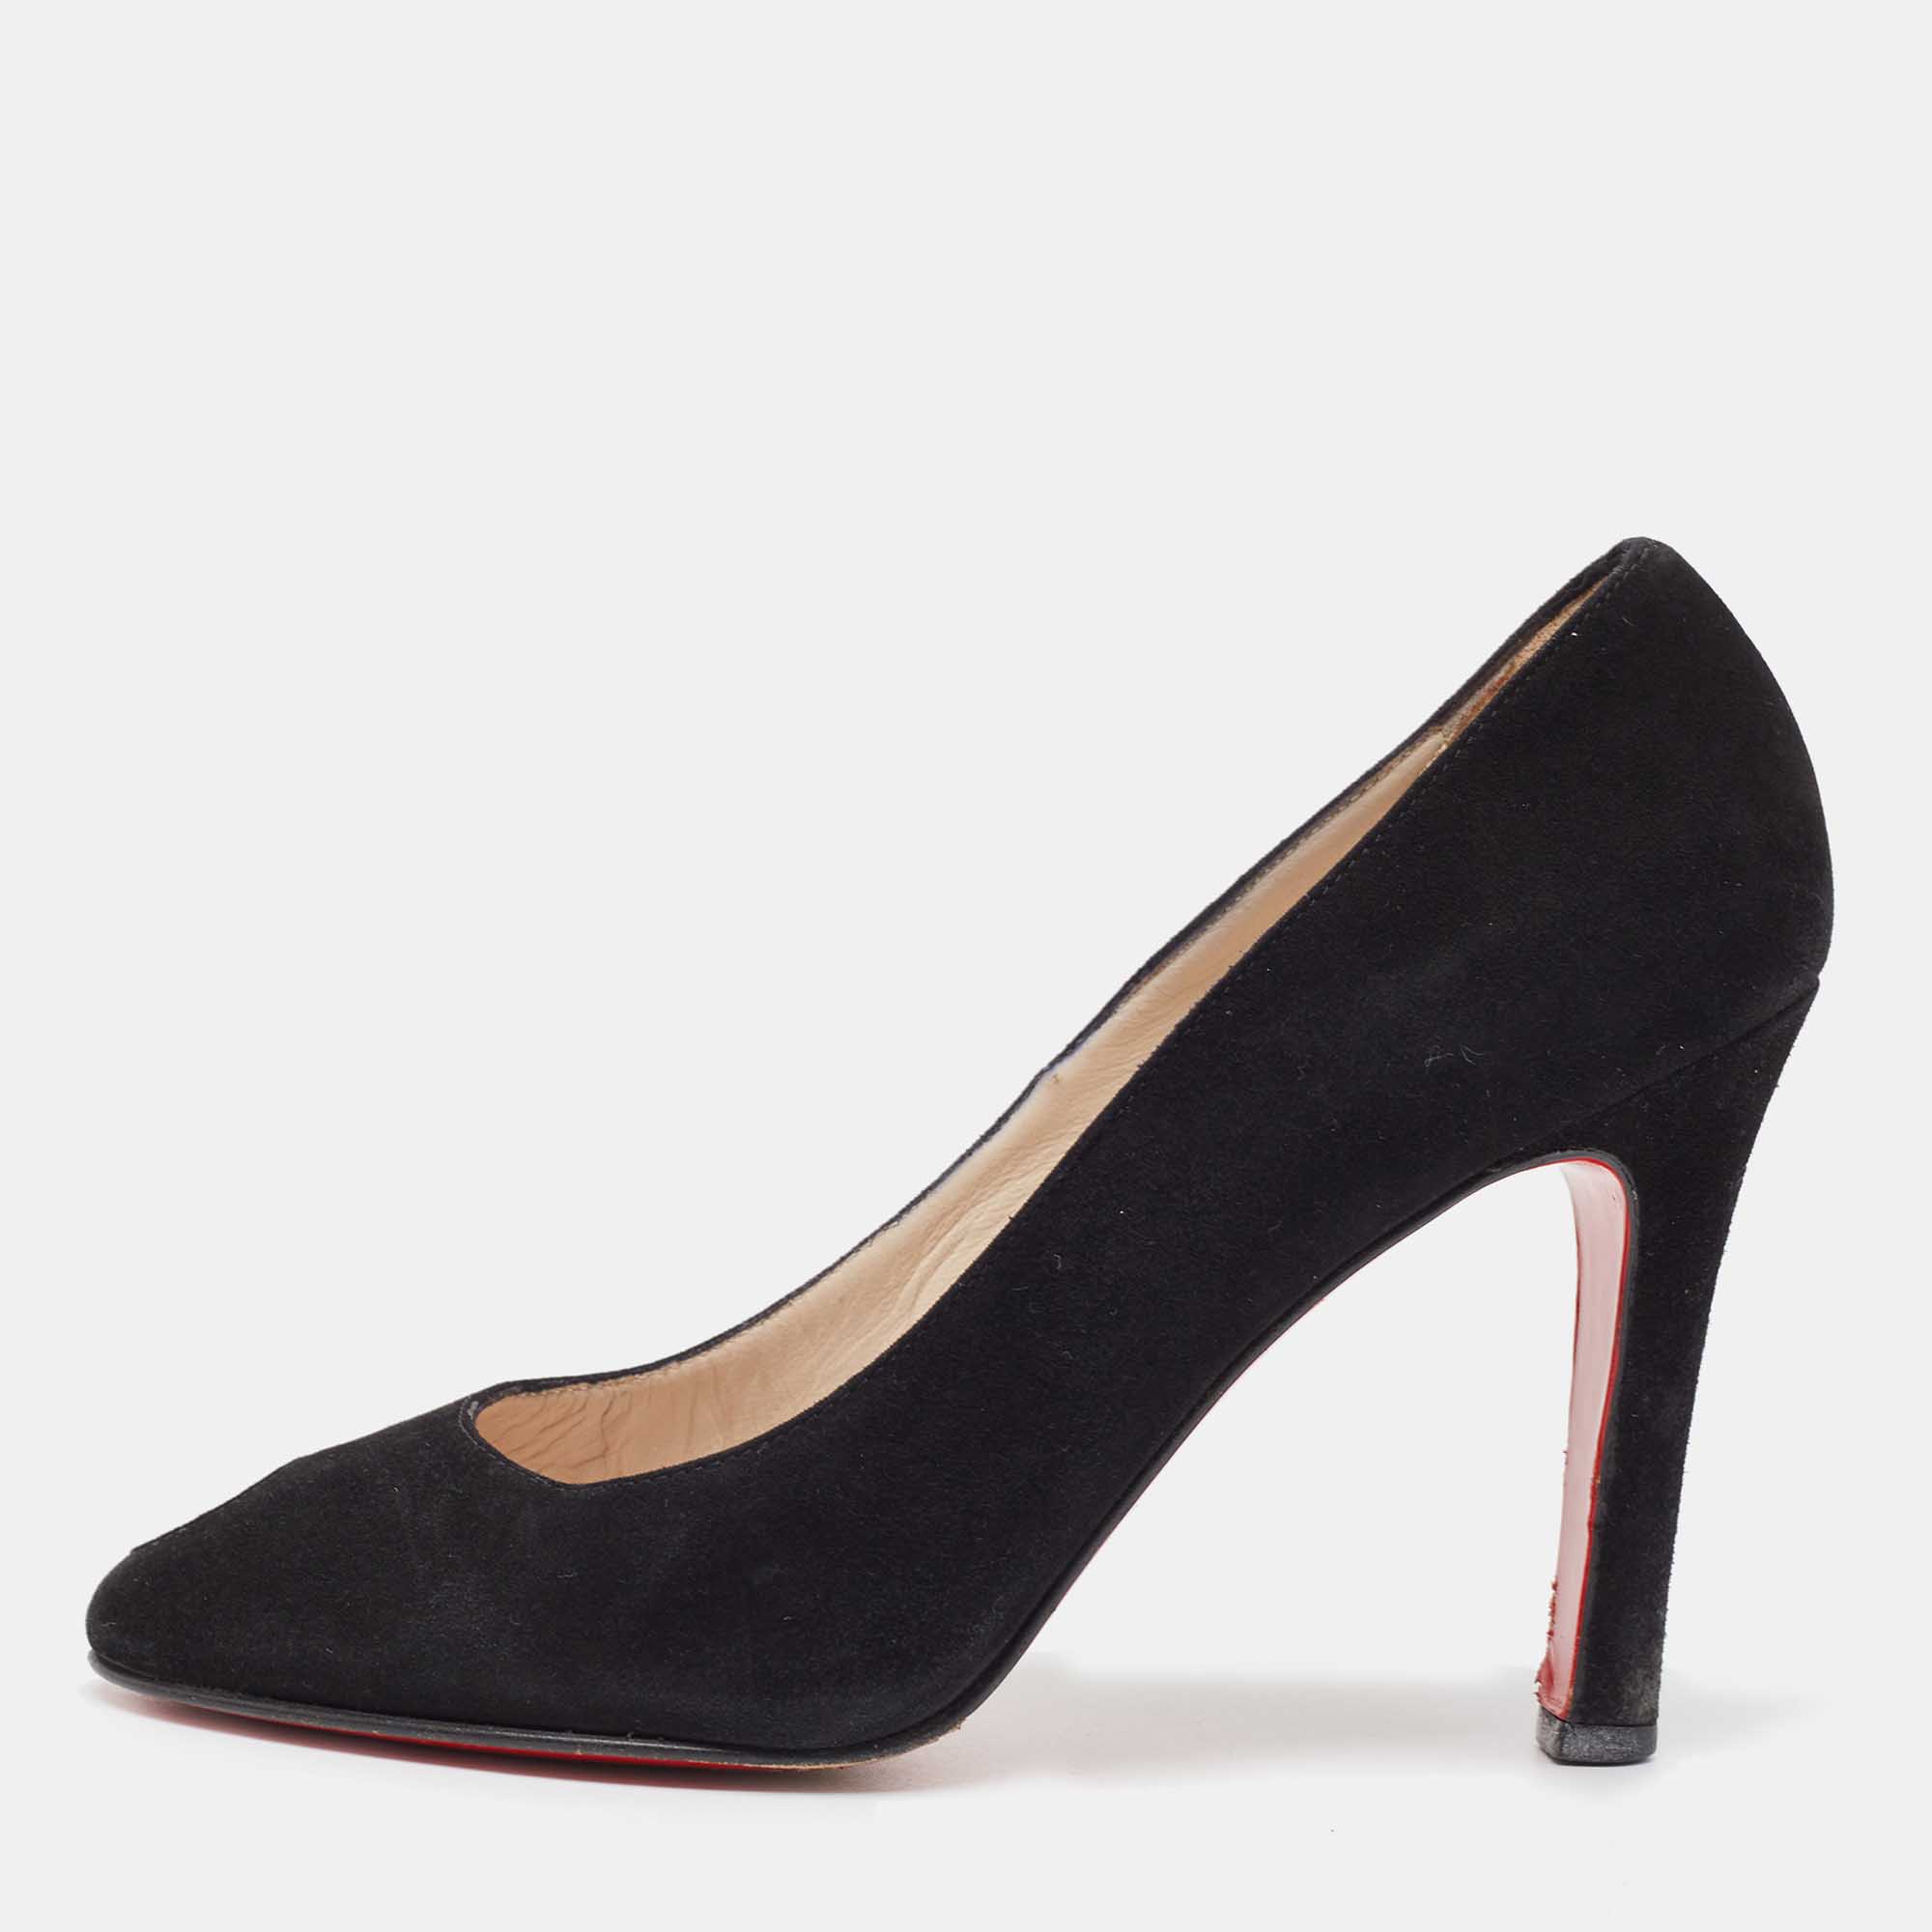 Pre-owned Christian Louboutin Black Suede Peep Toe Pumps Size 38